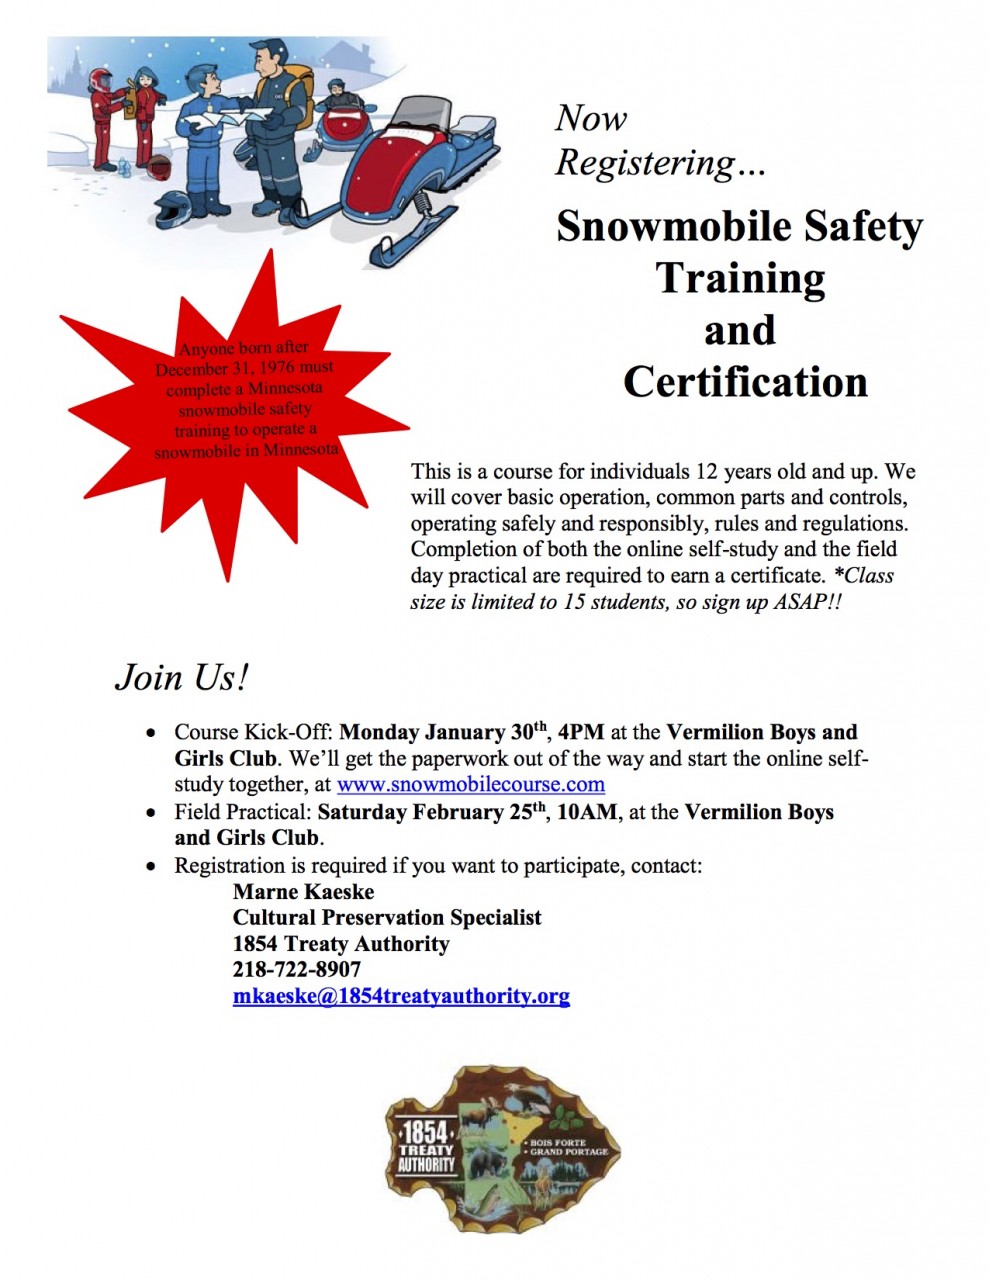 Snowmobile Safety Certification Course